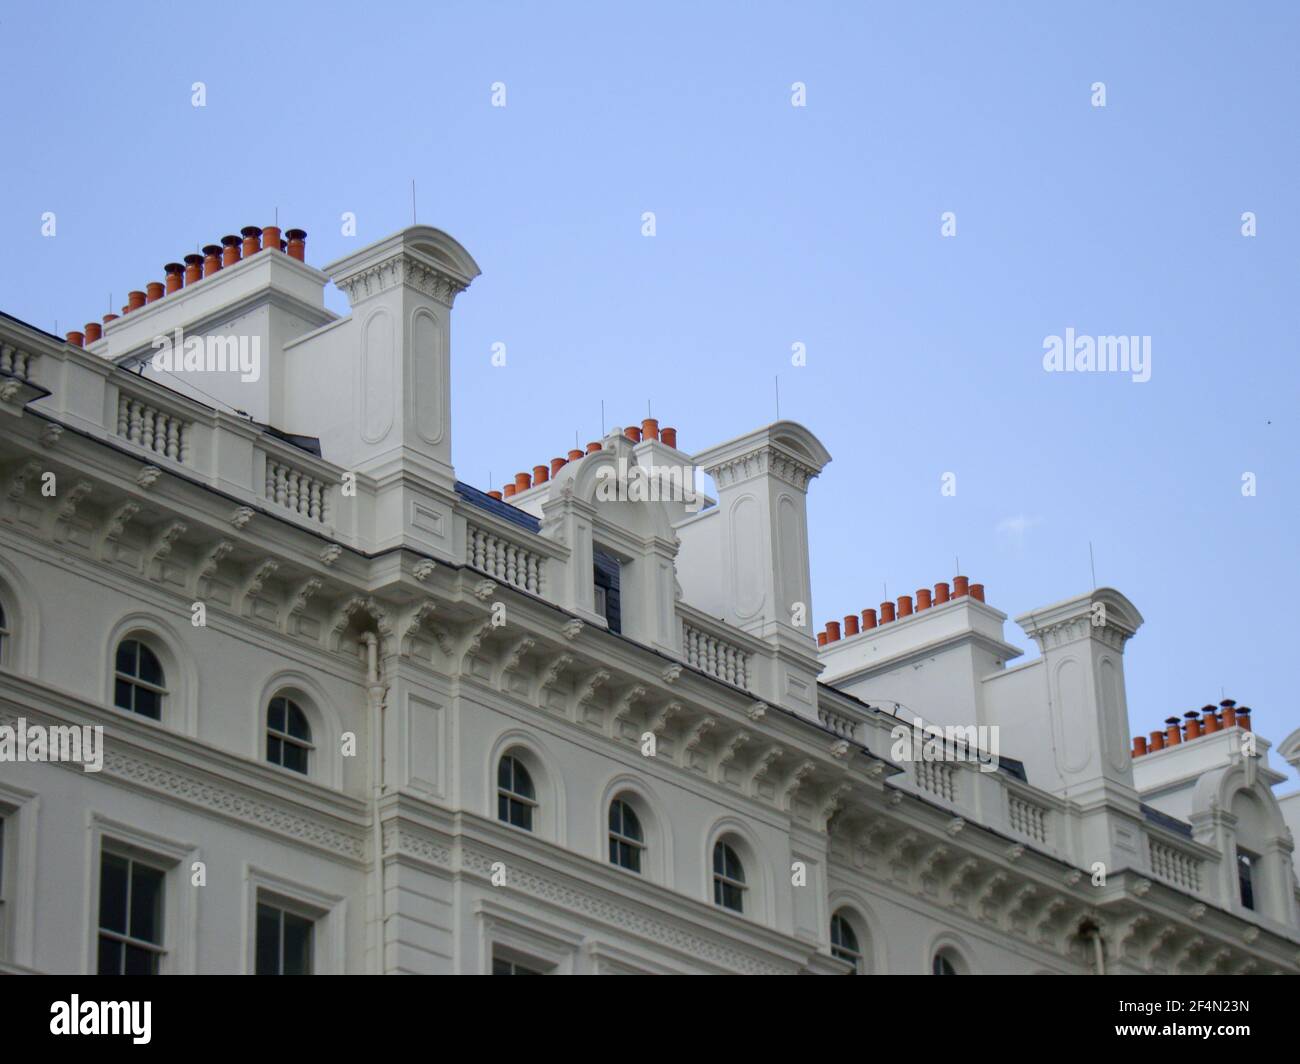 very elegant and ornate roofline of whitewashed mansions showing rows of chimney pots  Stock Photo